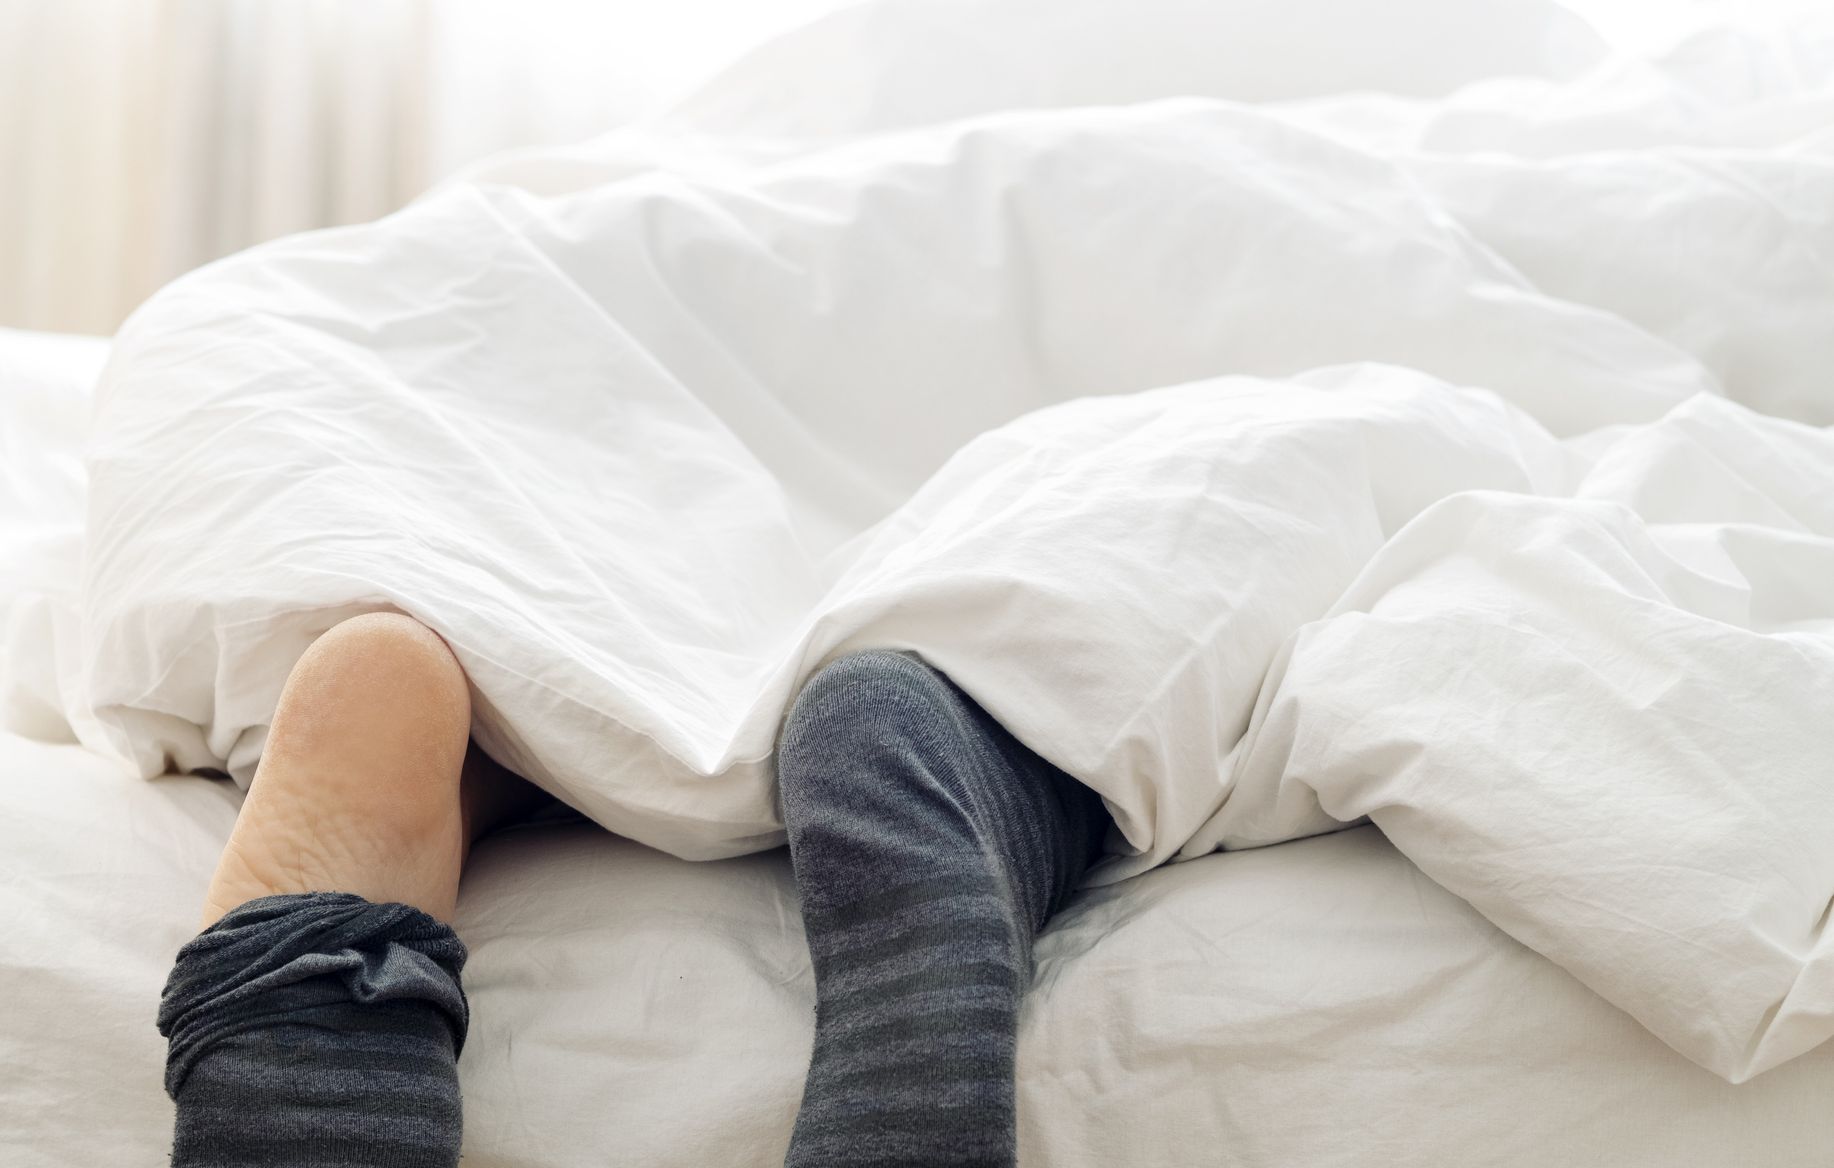 Did you know that wearing socks in bed is good for health?